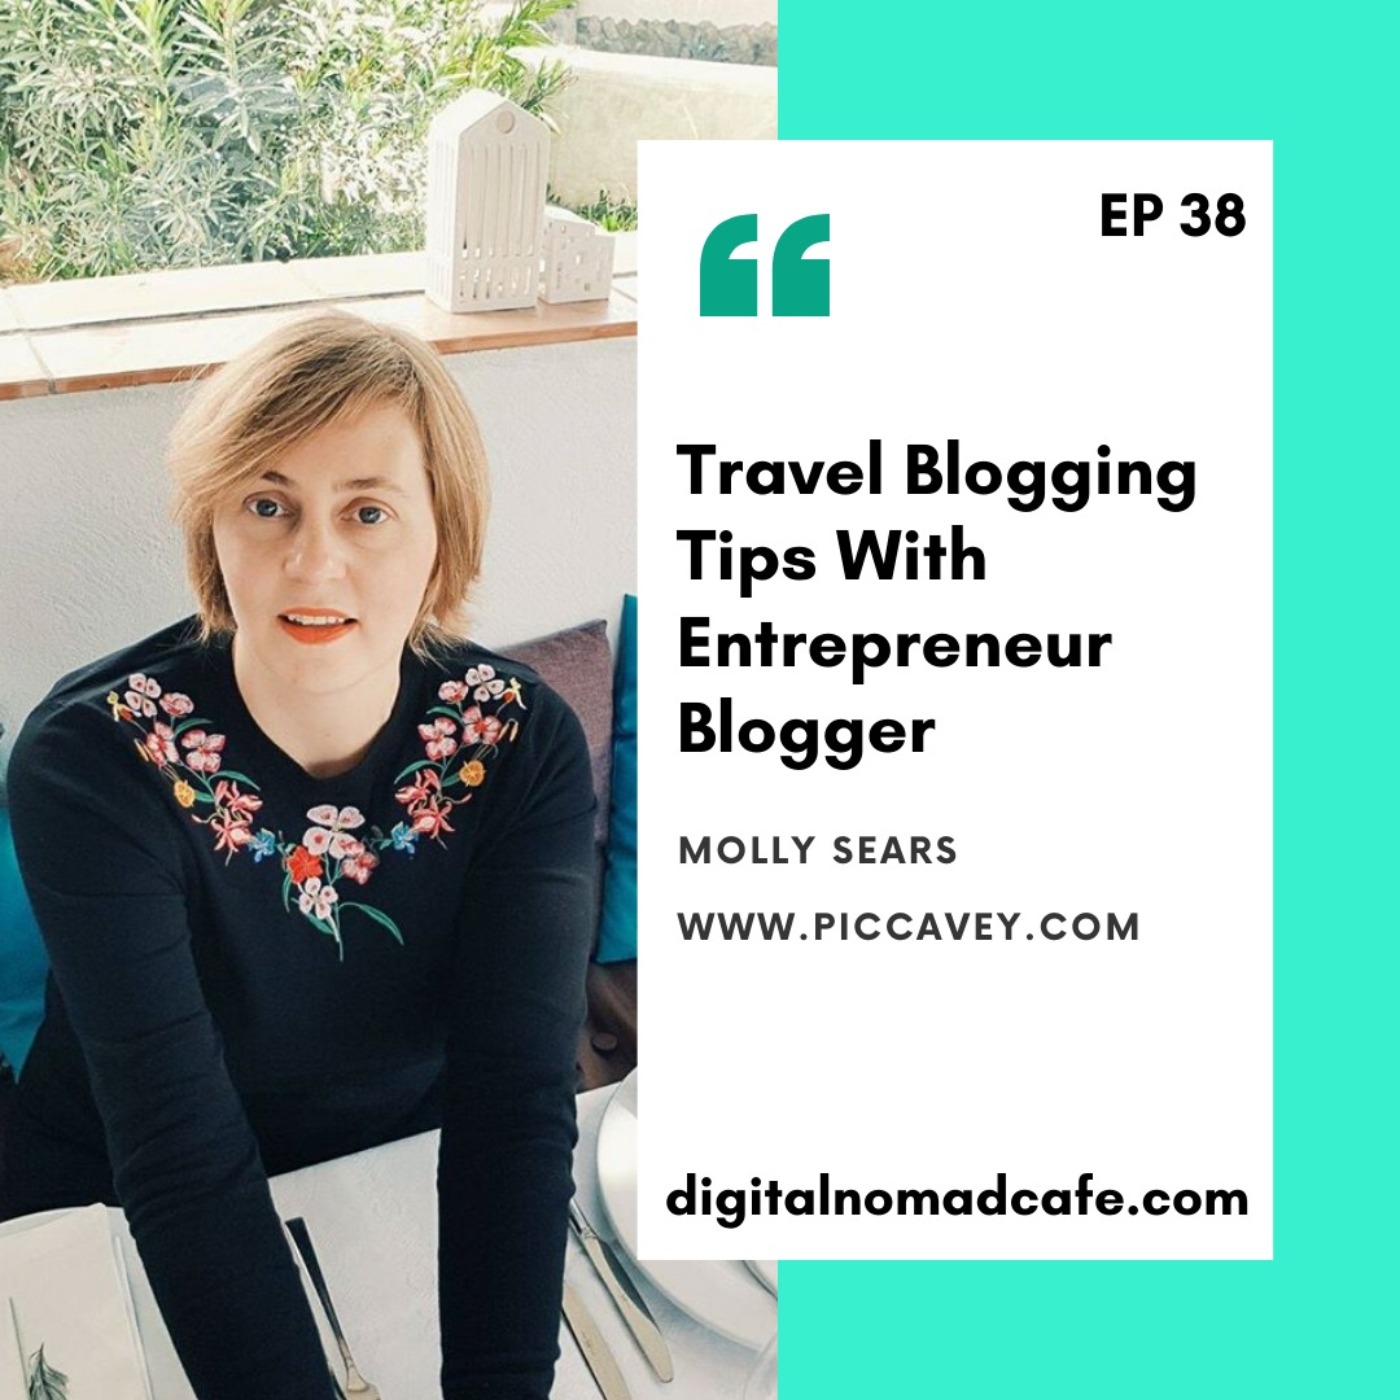 EP 38: Blogging Tips With Travel Entrepreneur - Molly Sears from piccavey.com